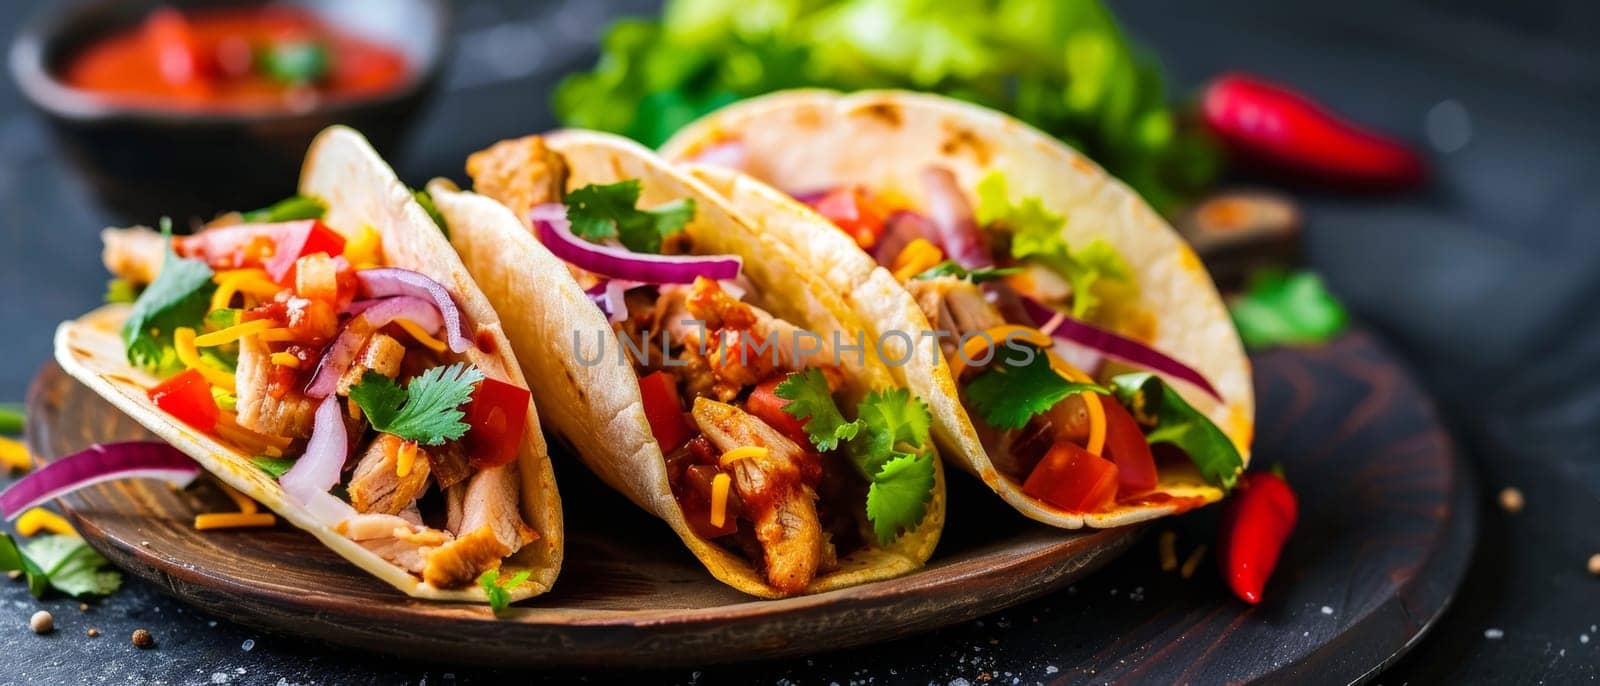 Soft tacos filled with grilled chicken, adorned with colorful bell peppers, red onion, and a sprinkle of cheese, presented on a dark plate. by sfinks